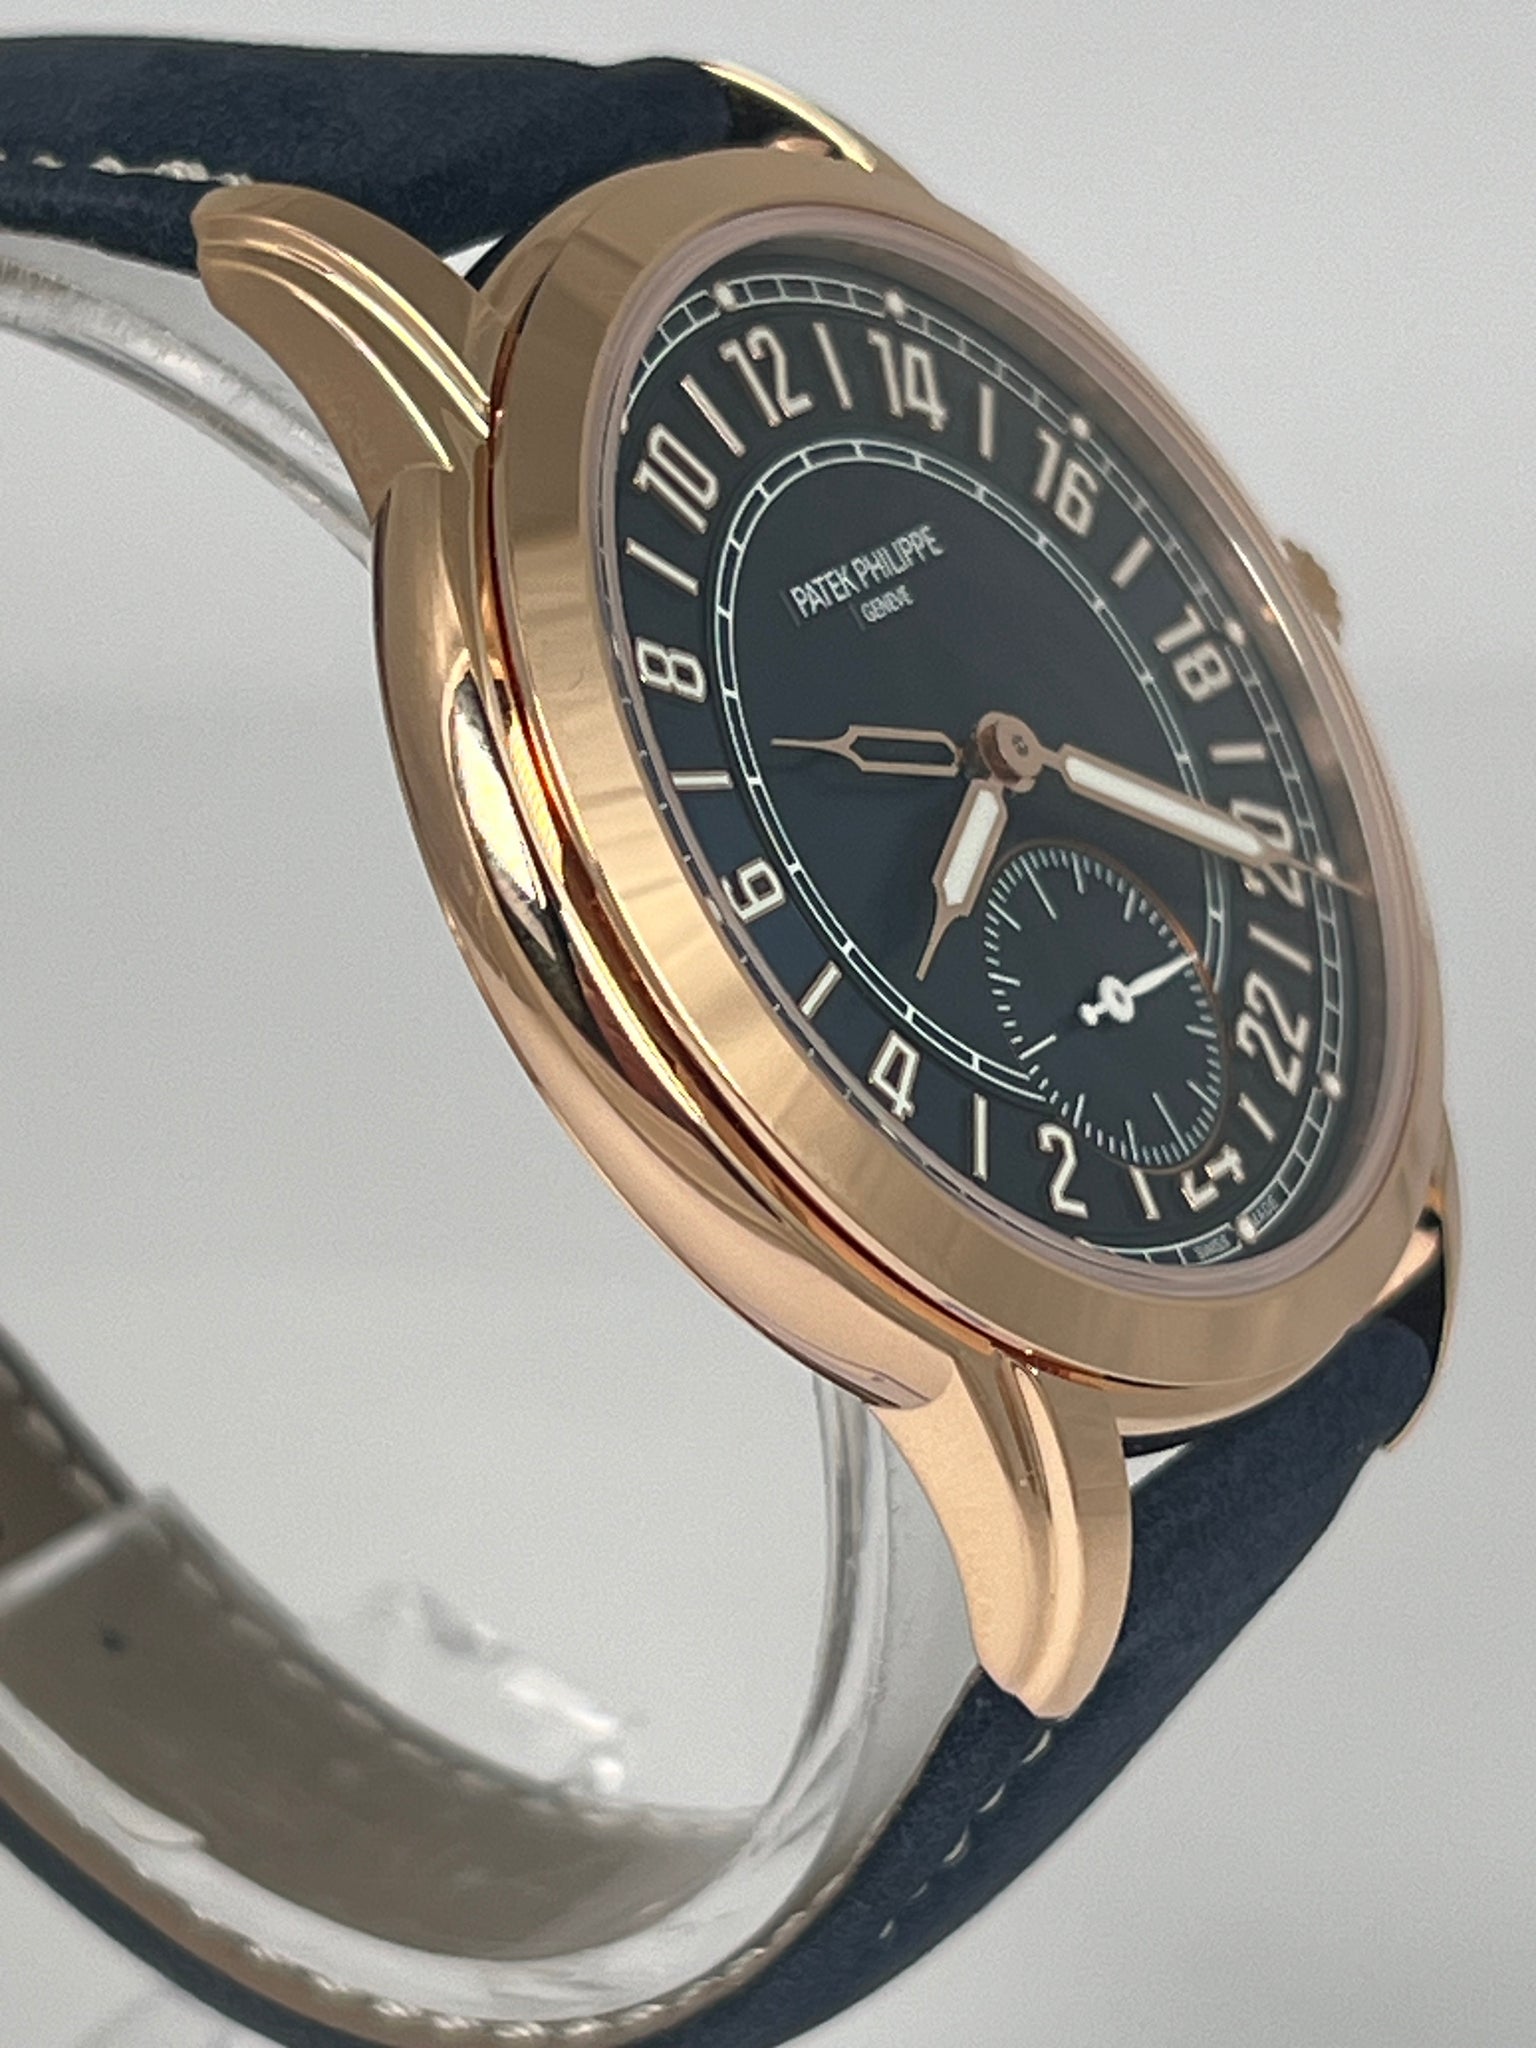 PATEK PHILIPPE 24 HOUR TRAVEL TIME BLUE DIAL ROSE GOLD 5224R